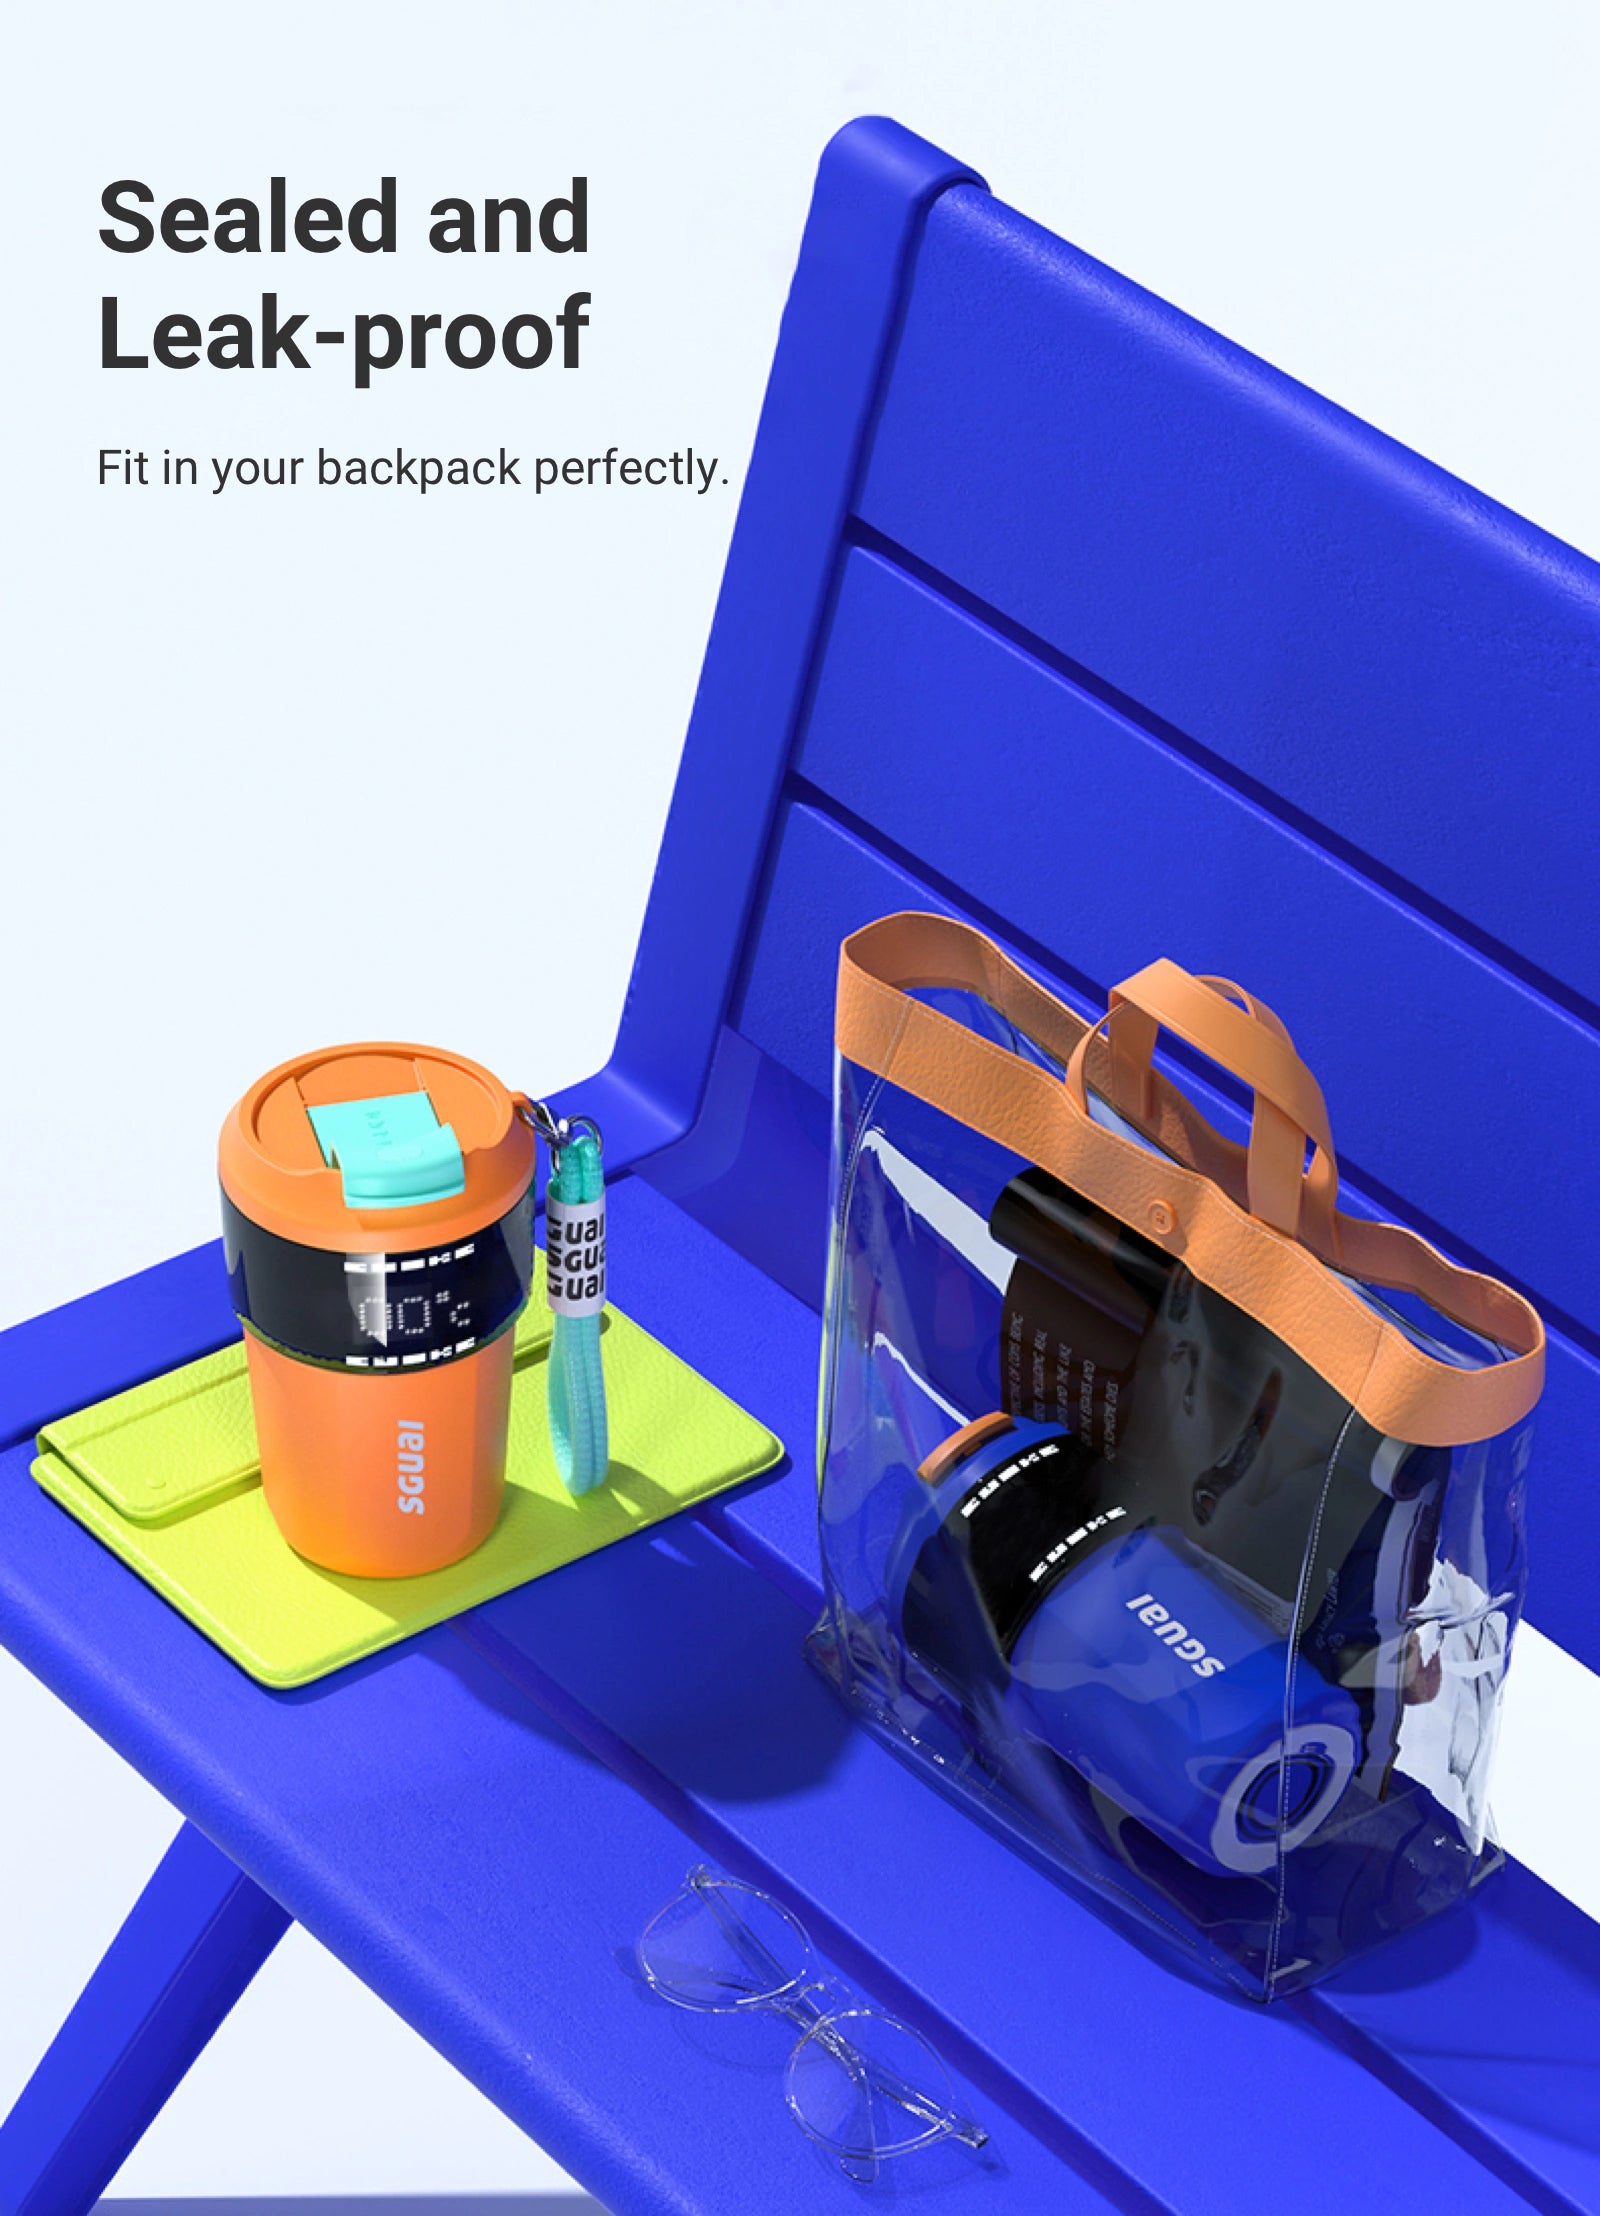 - Sealed and Leak-proof - Fit in your backpack perfectly.